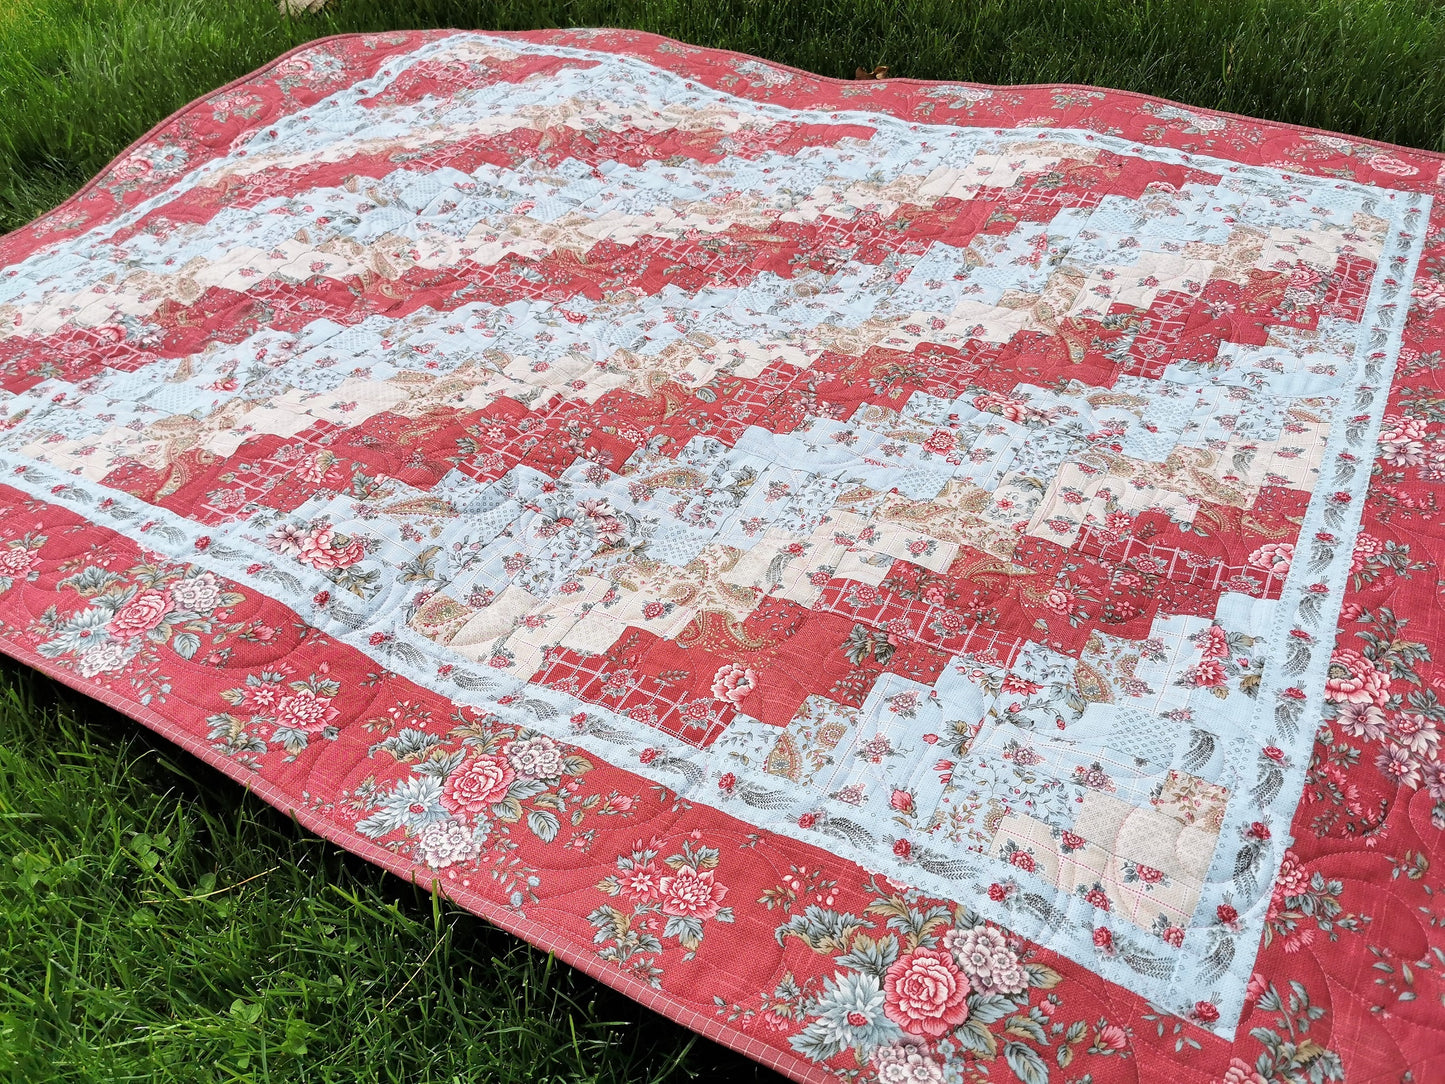 this lovely log cabin throw quilt features french floral fabrics in a coral rose, powder blue and cream color scheme. Quality cotton fabrics. 